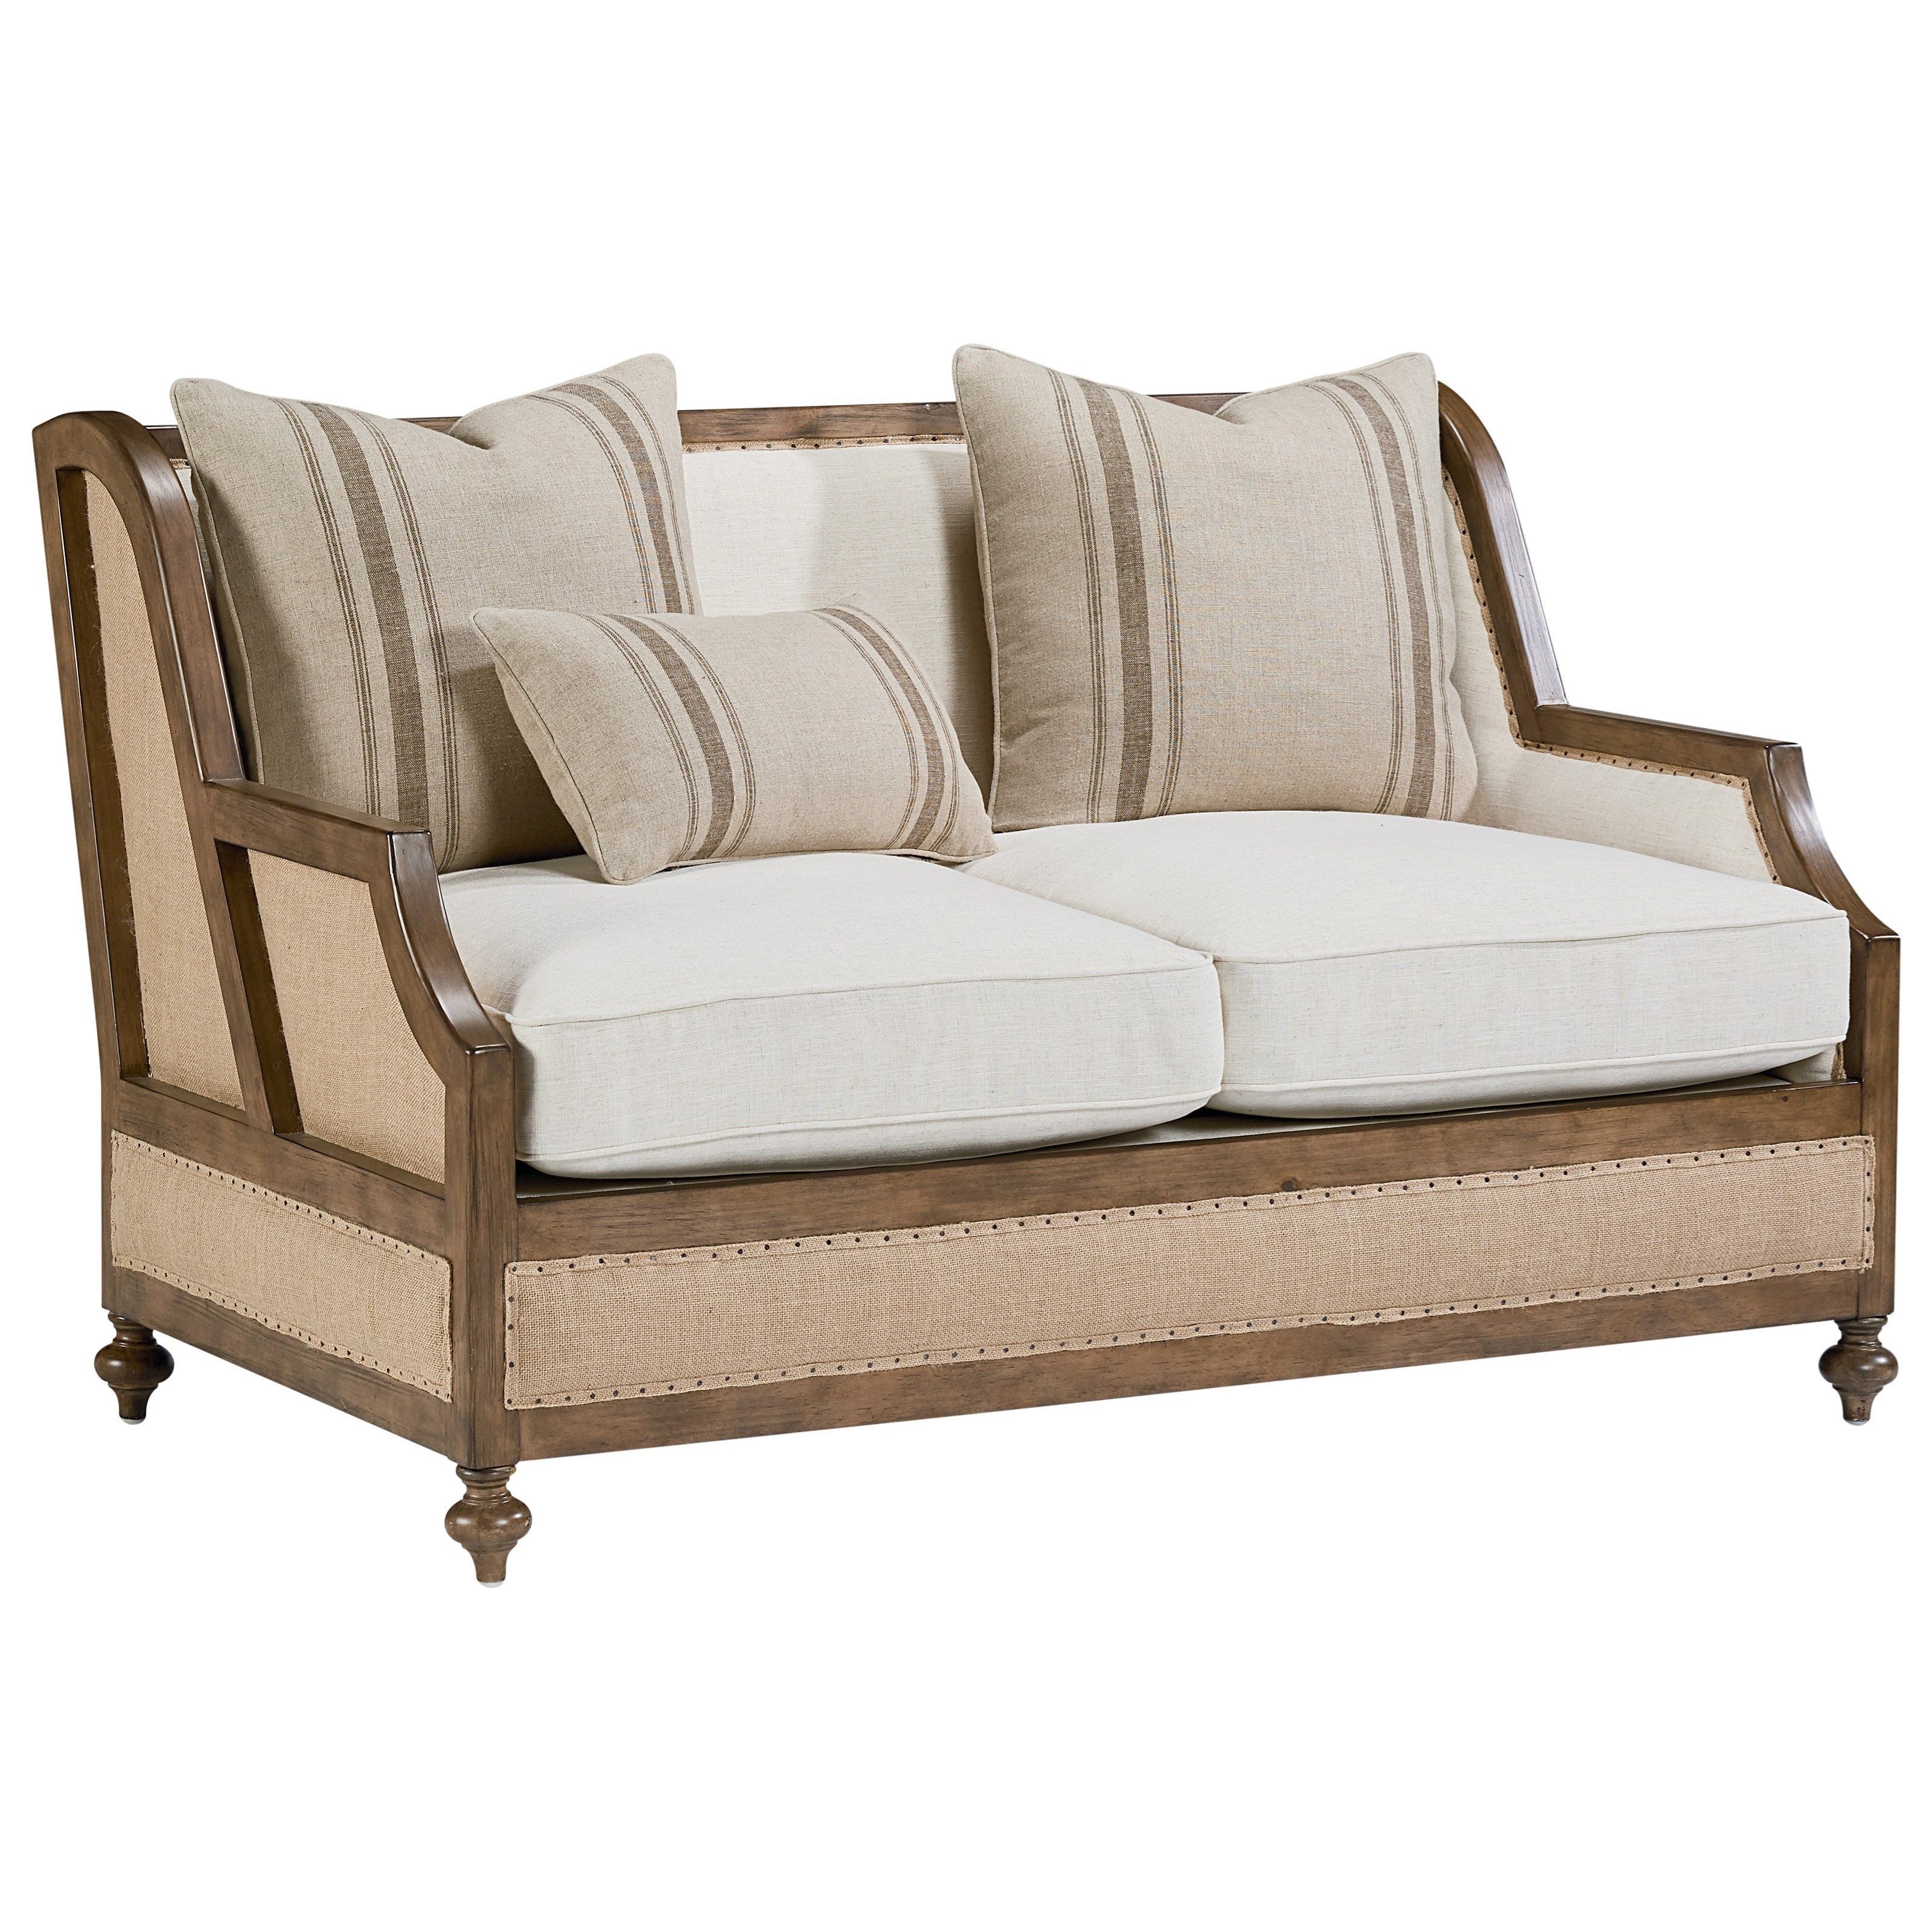 Foundation Loveseat With Three Accent Pillowsmagnolia Home For Magnolia Home Paradigm Sofa Chairs By Joanna Gaines (View 20 of 20)